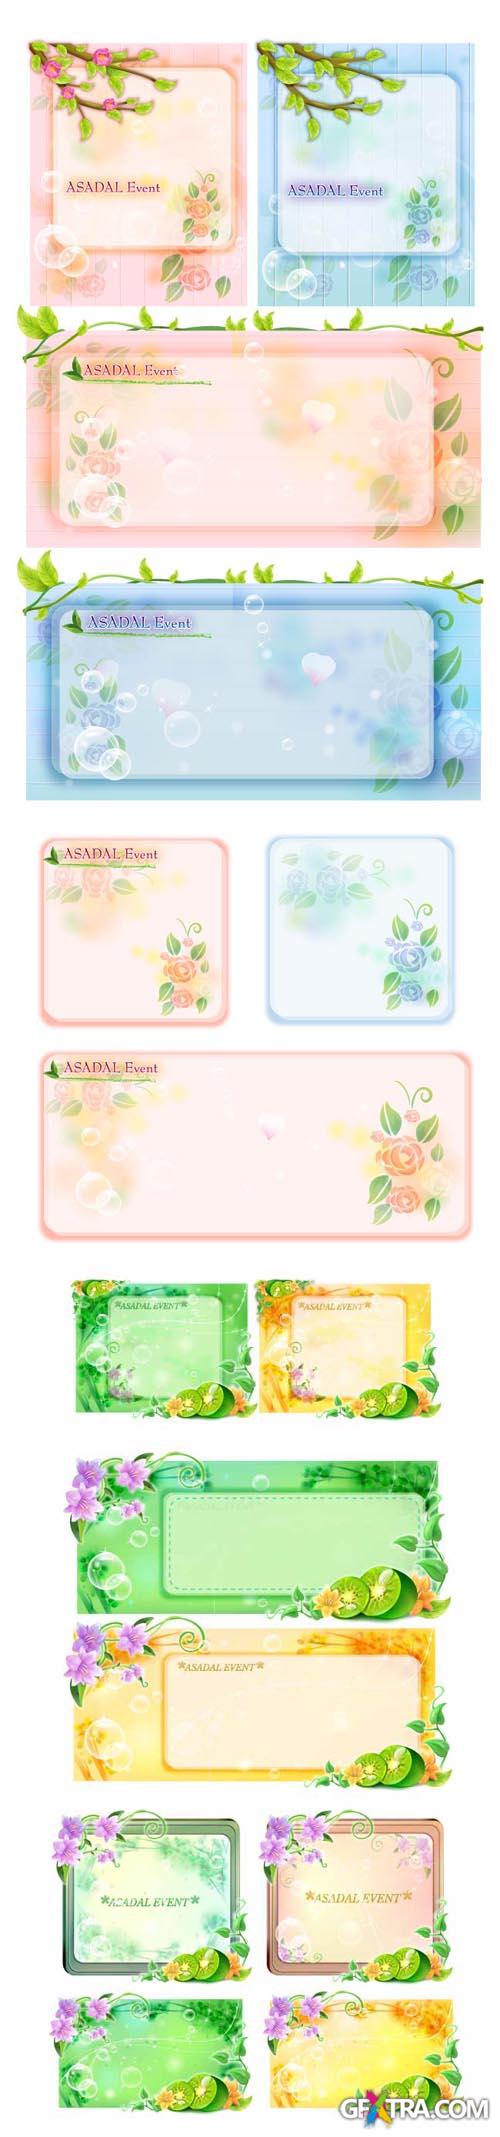 Sunny Vector Banners with Flowers